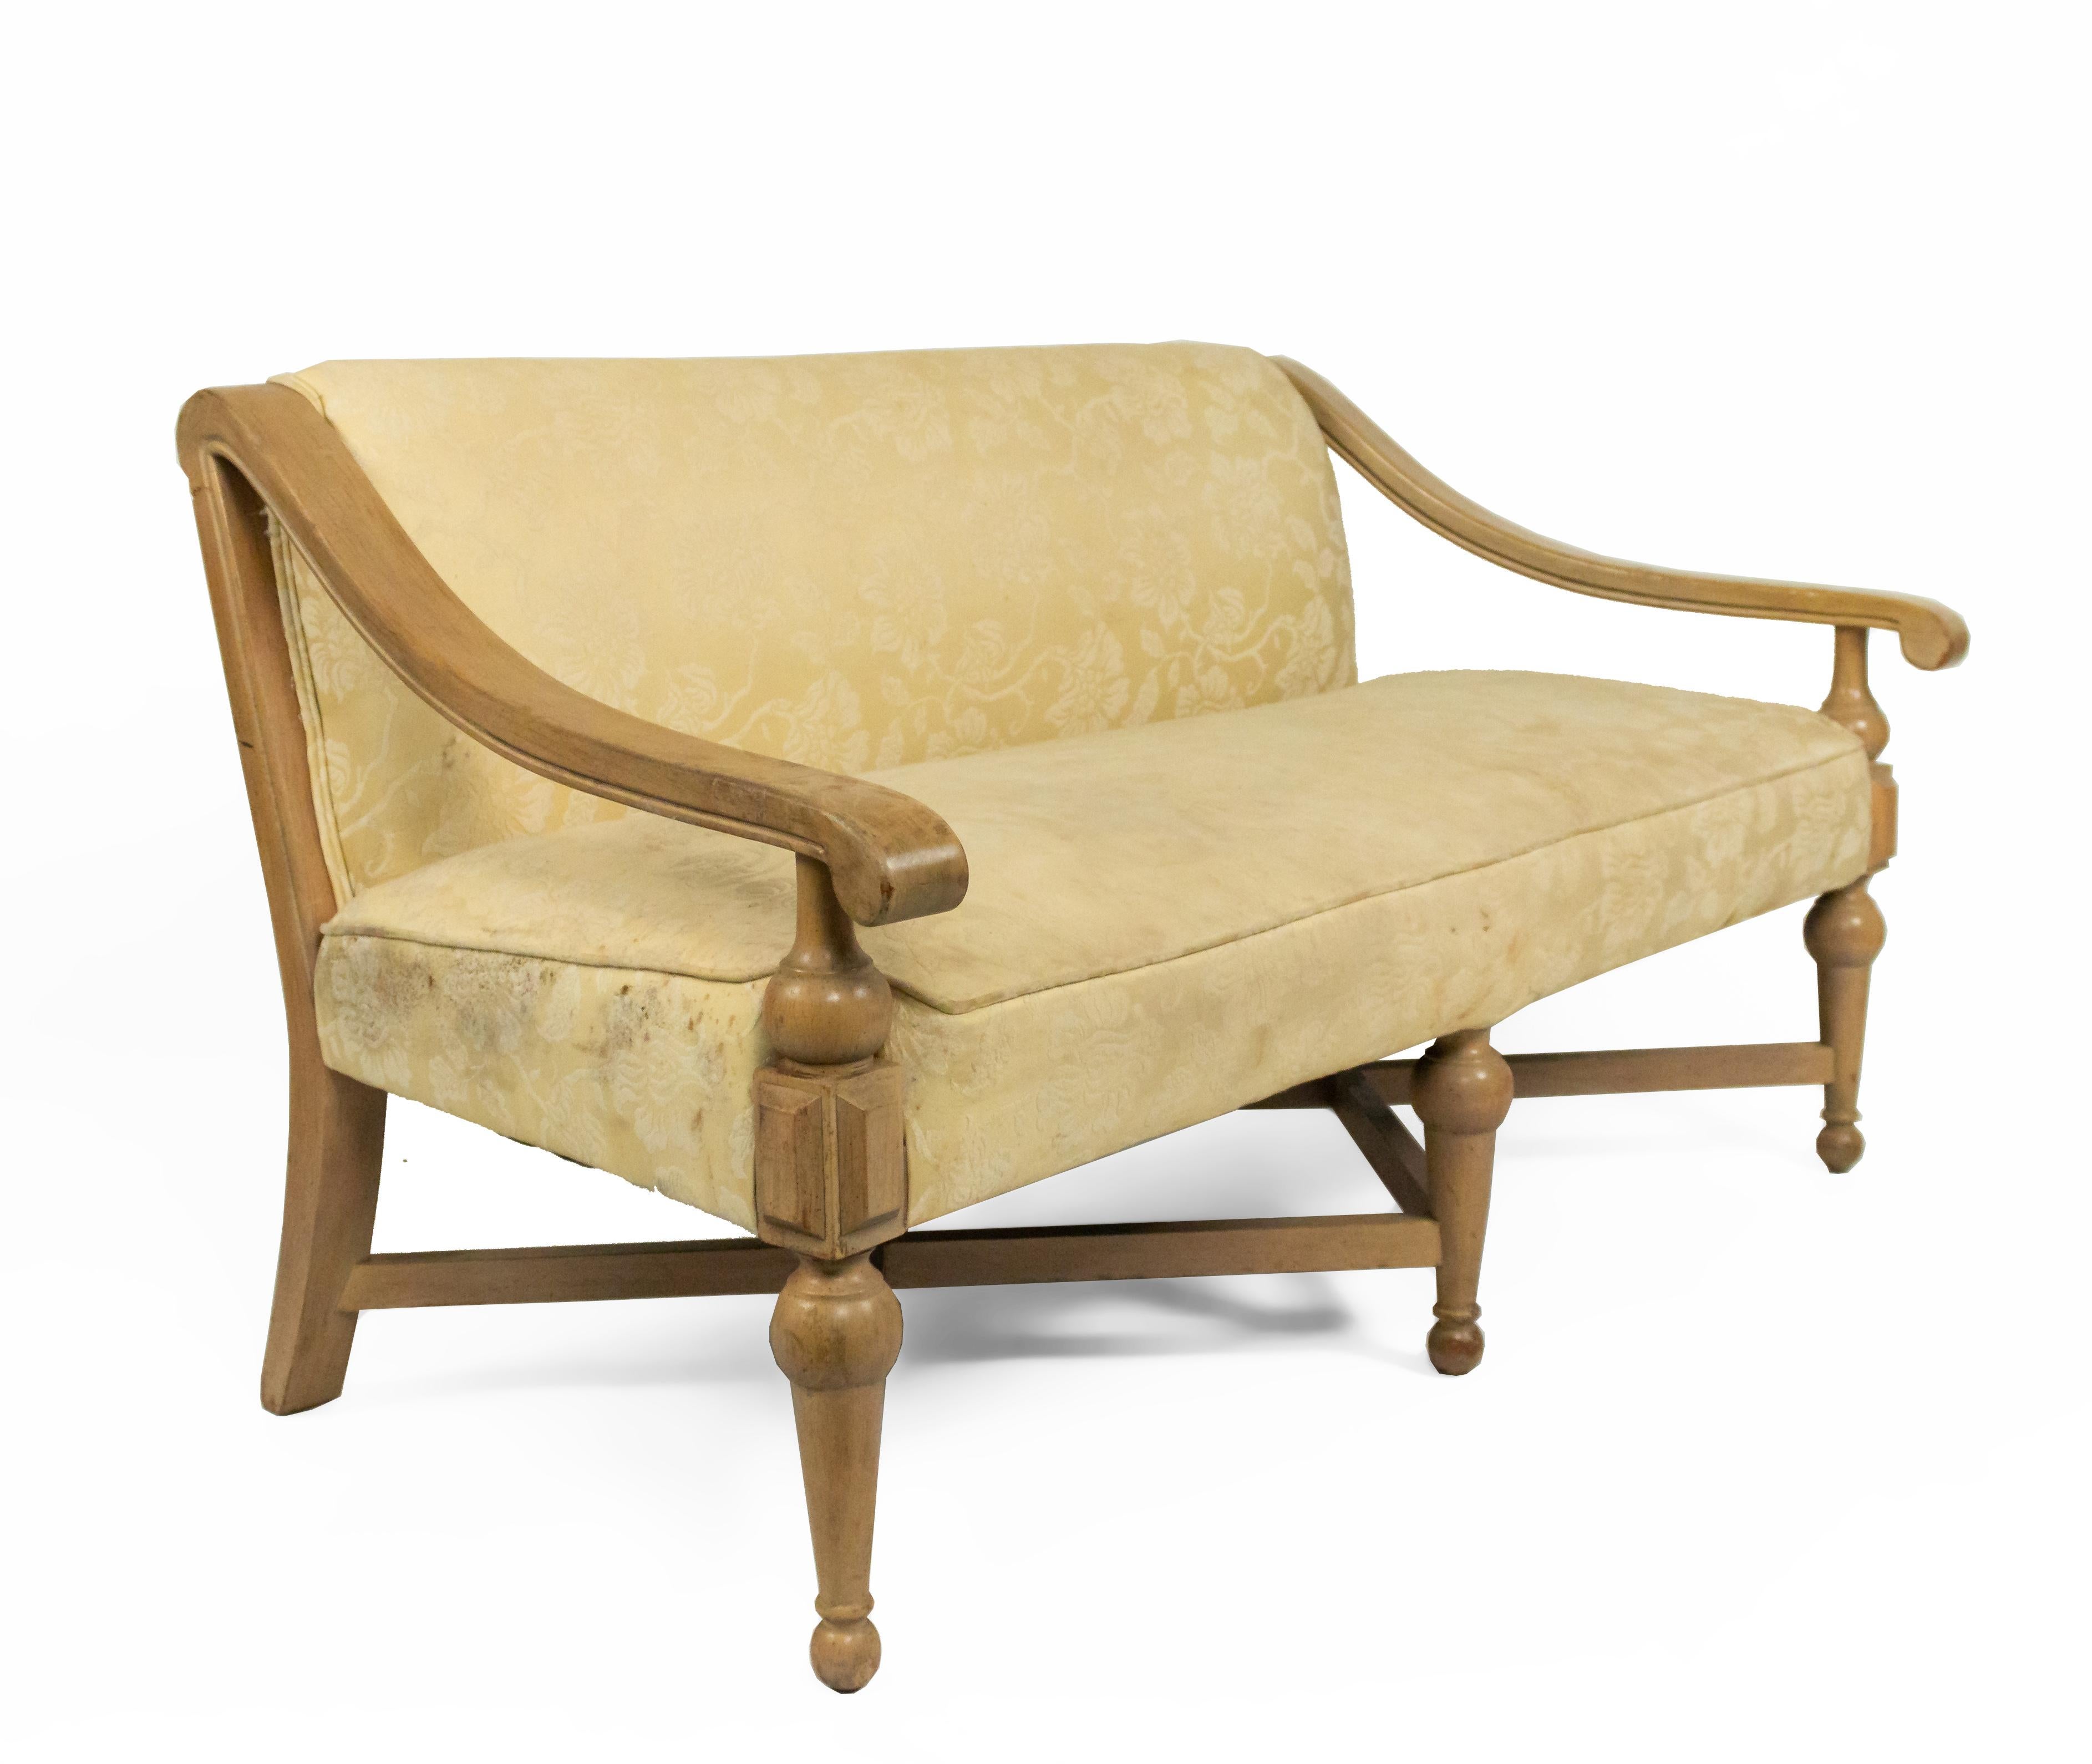 American 1960s sycamore loveseat having a seat and back upholstered in a light yellow floral pattern with an X-stretcher base and back.